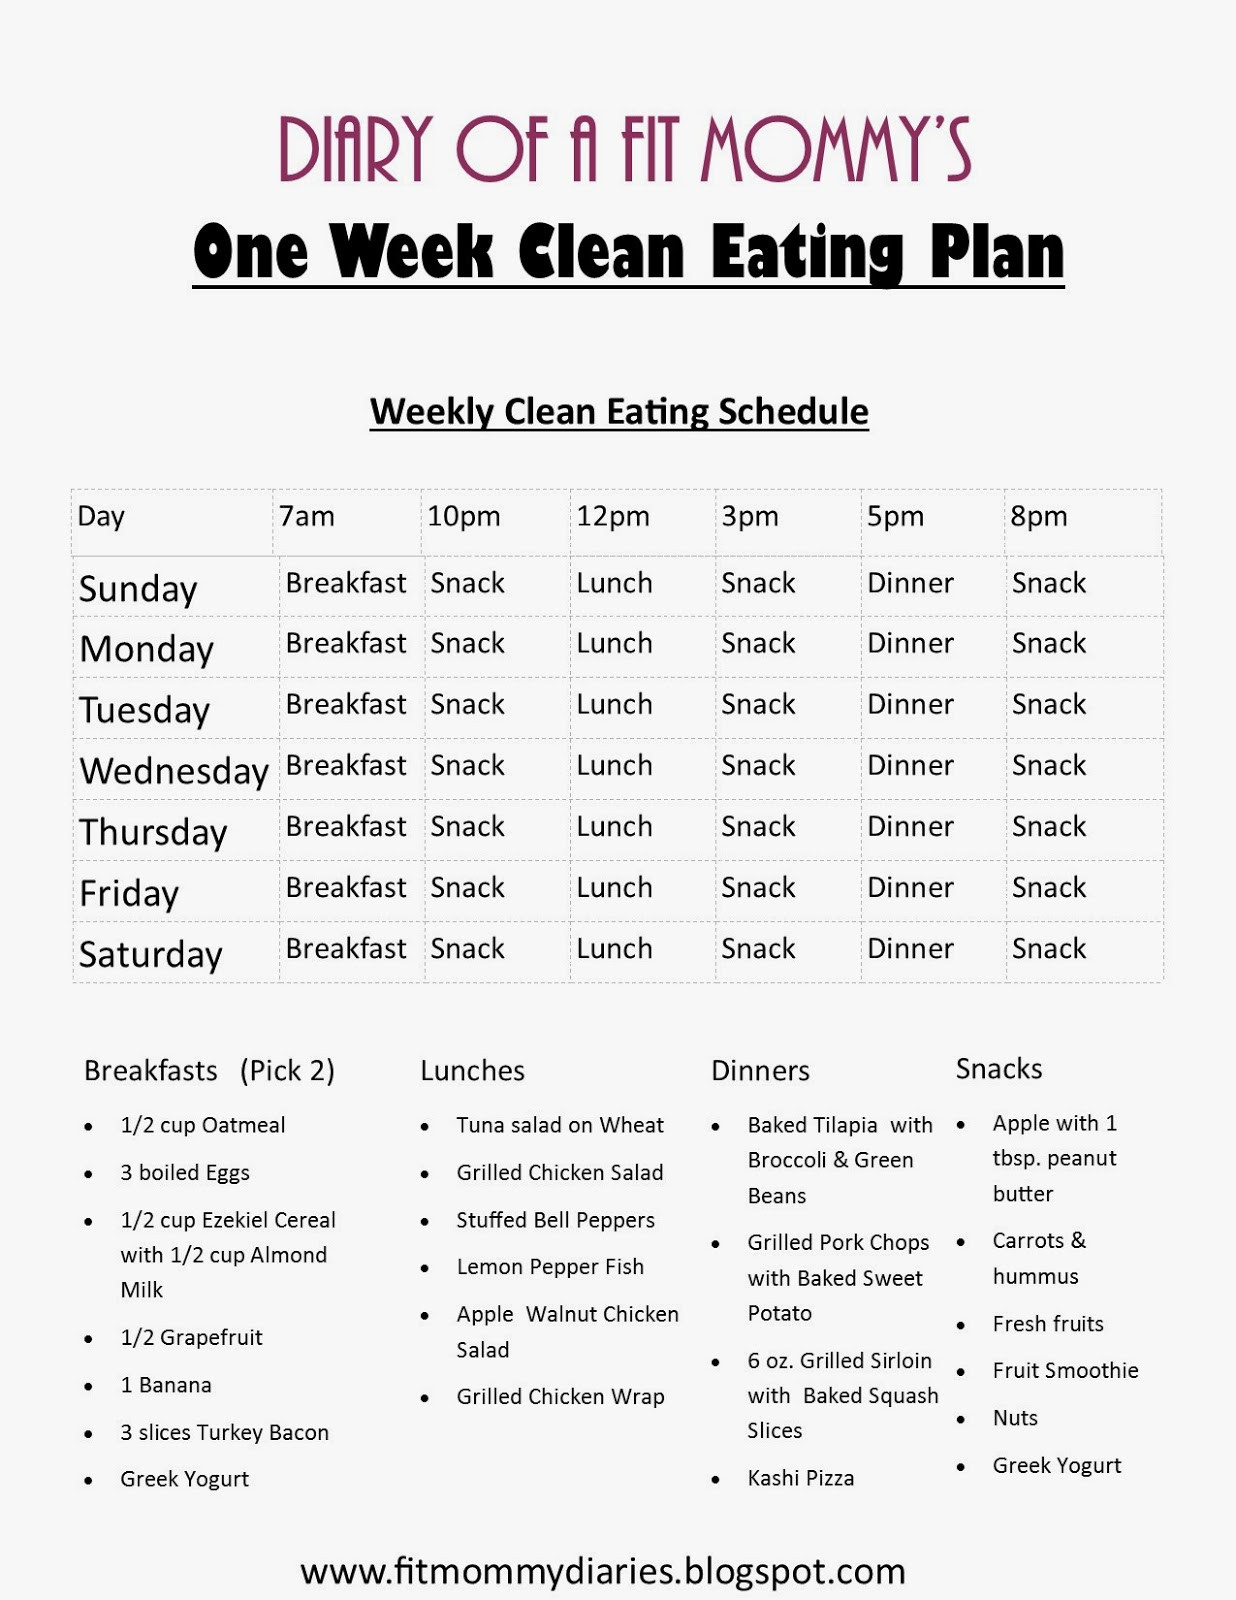 Examples Of Clean Eating
 Diary of a Fit Mommy Diary of a Fit Mommy s e Week